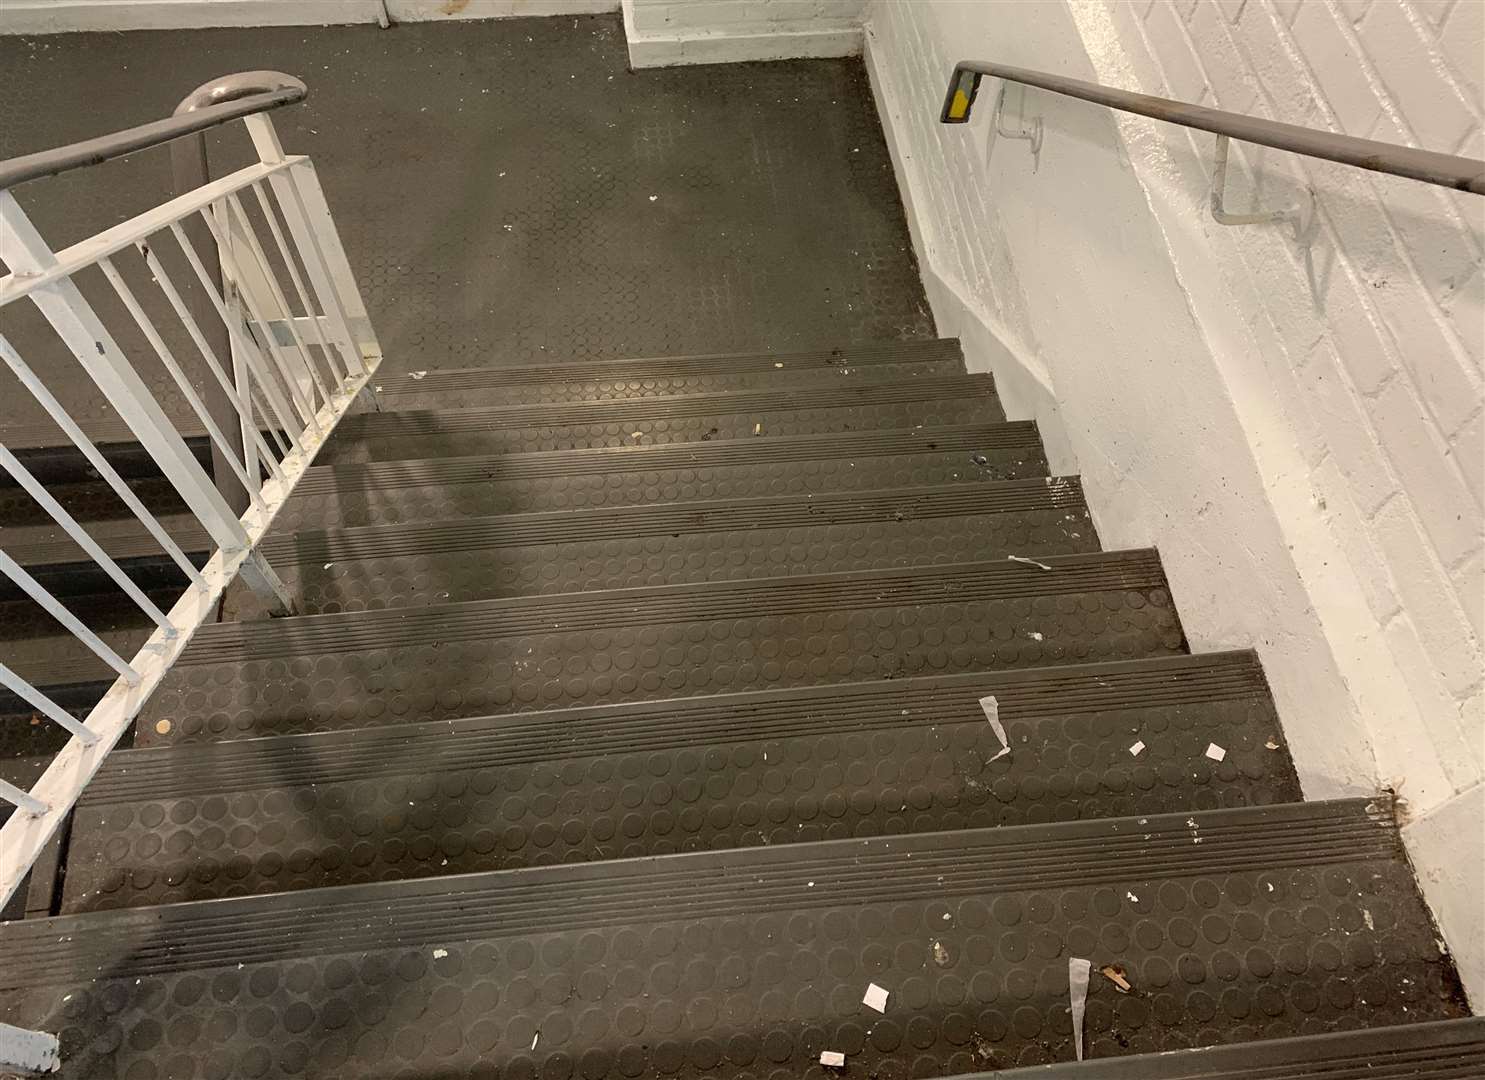 There are discarded cigarette butts on the stairs in the car park